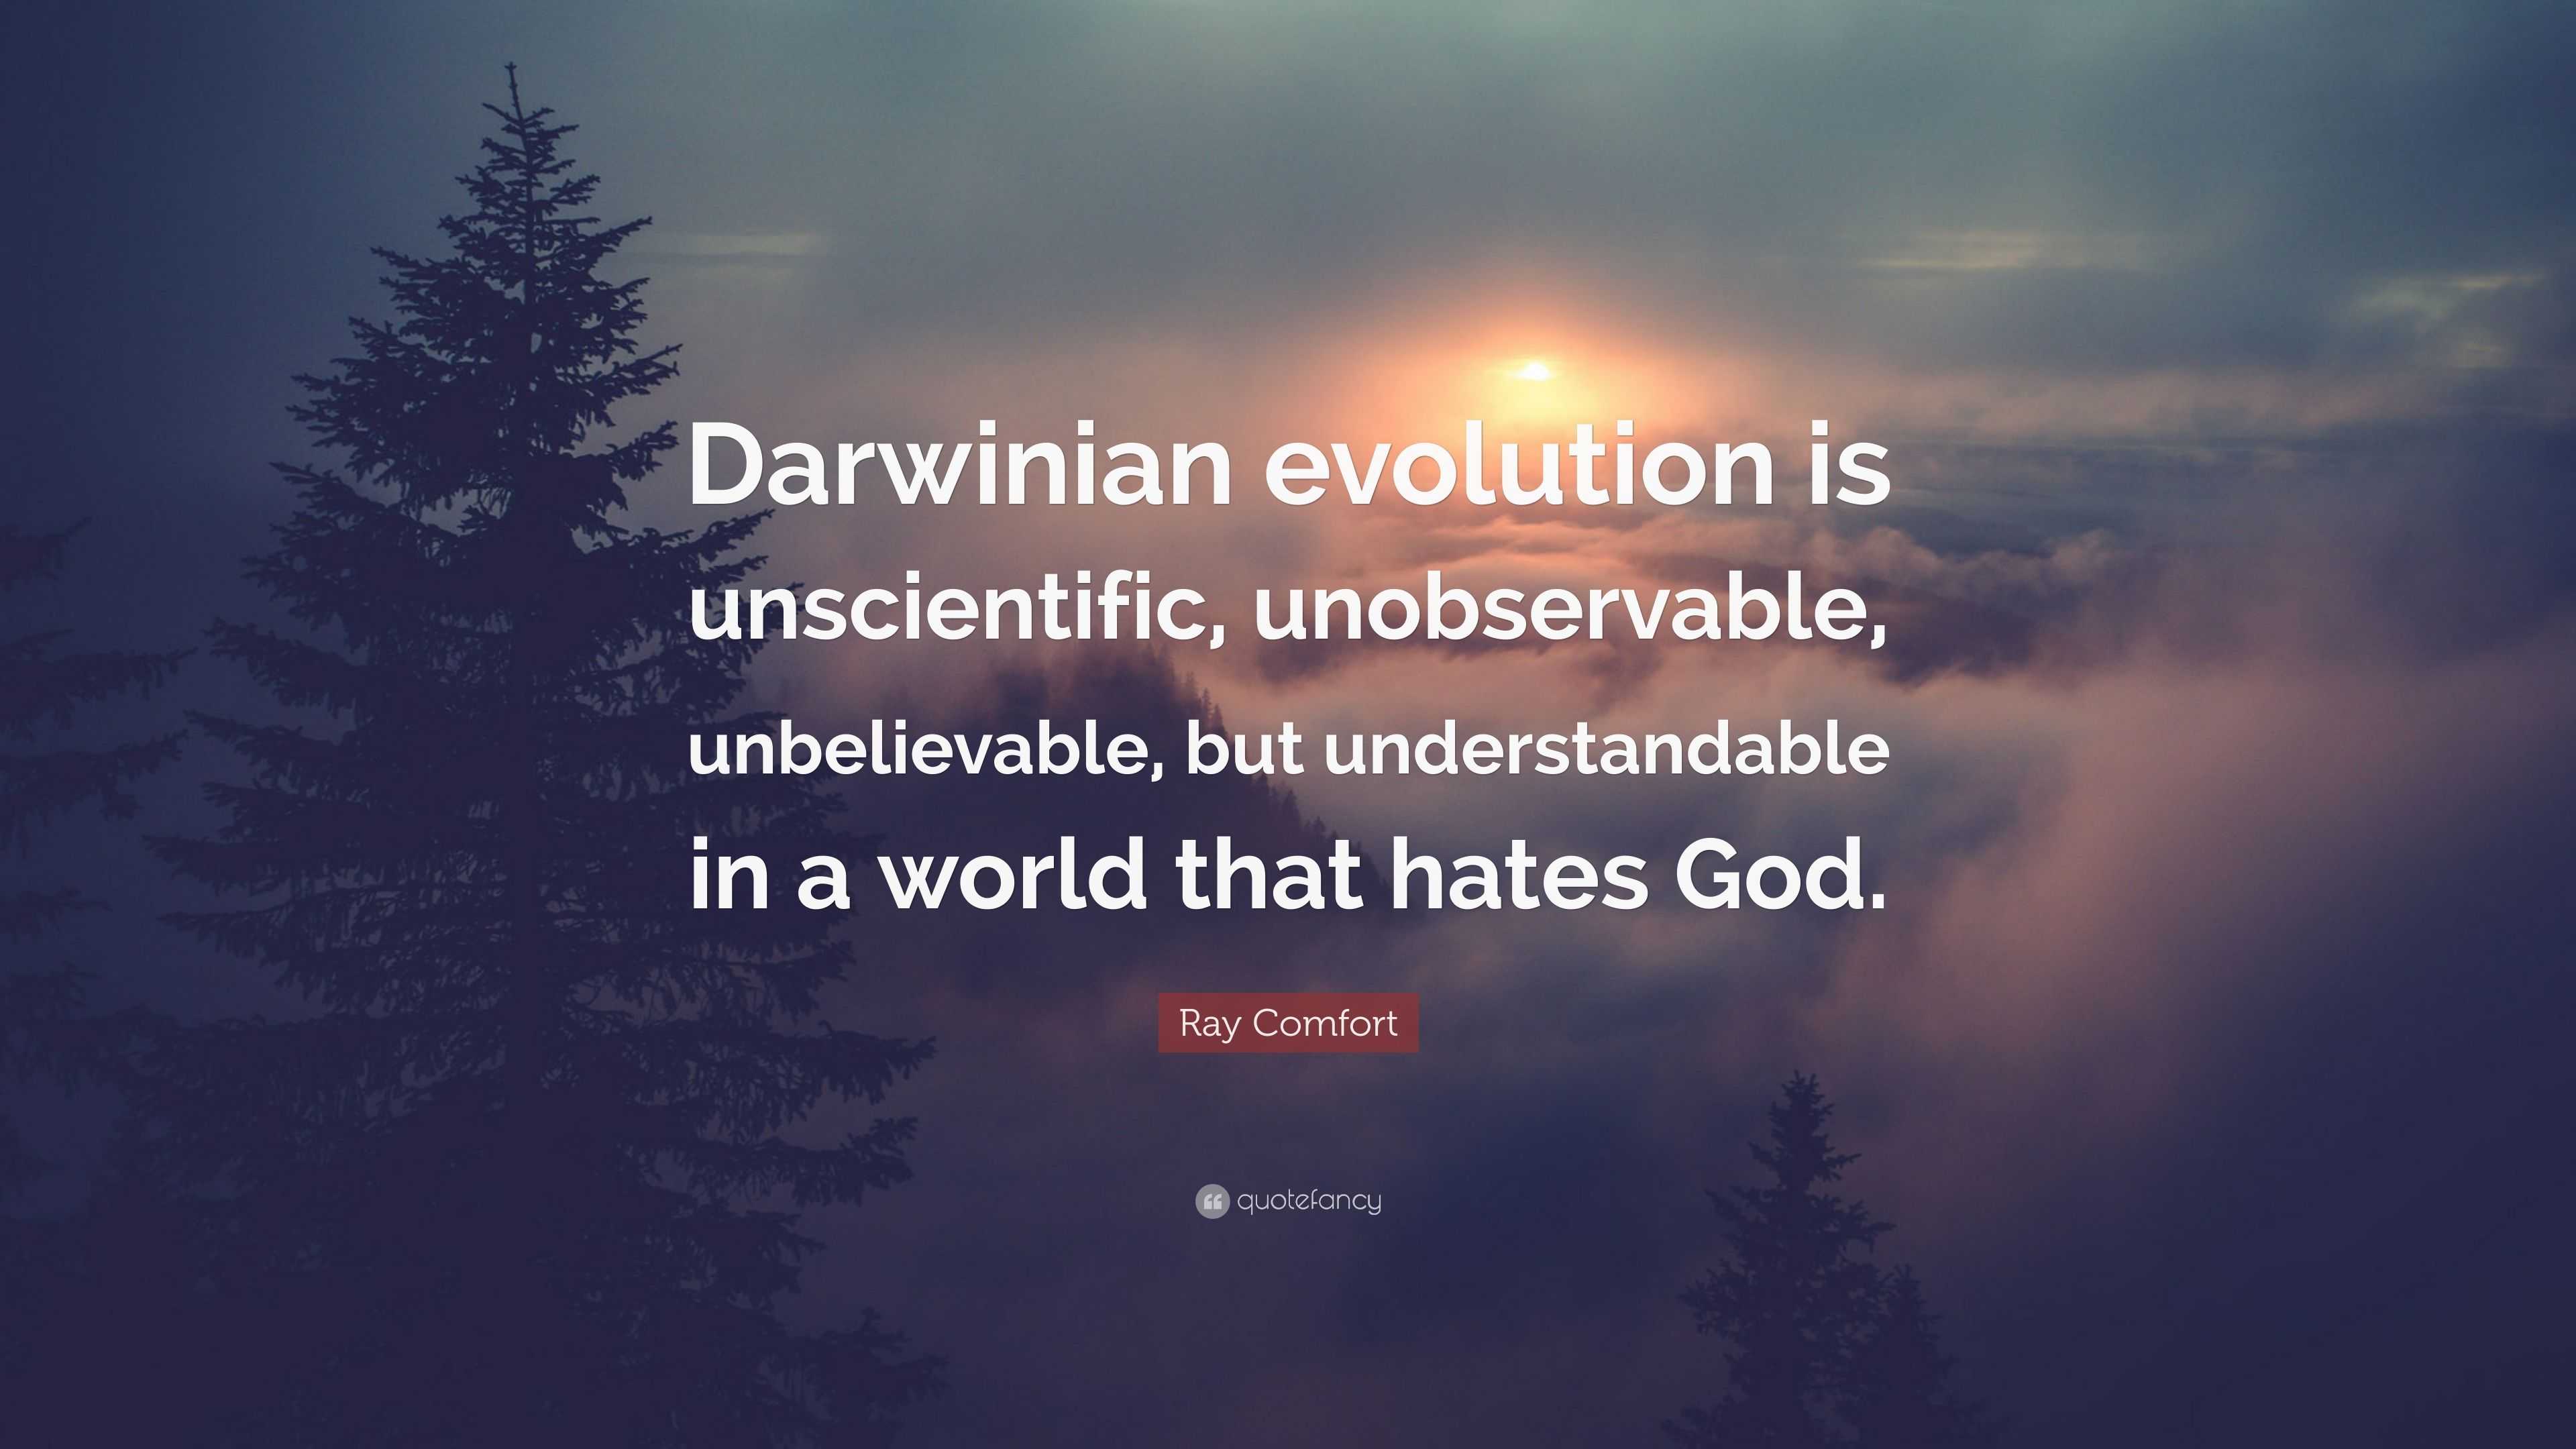 Ray Comfort quote: Evolution is unobservable. It's based on blind